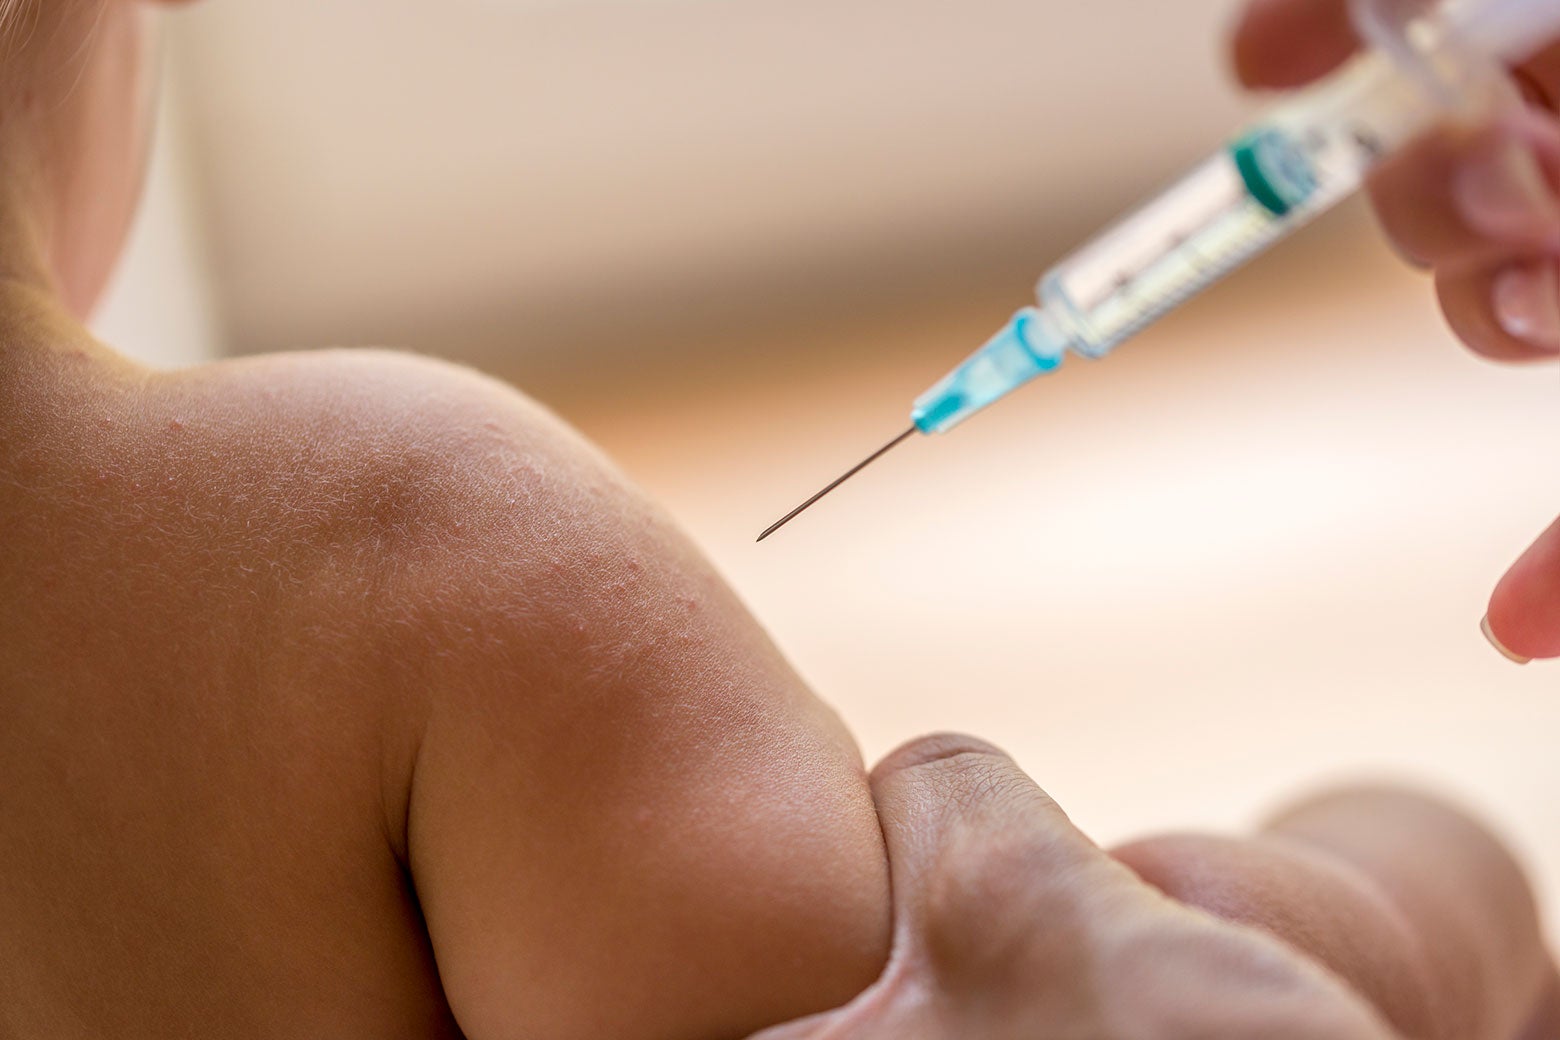 A syringe approaching a child's arm, which is being squeezed to prepare for the injection.